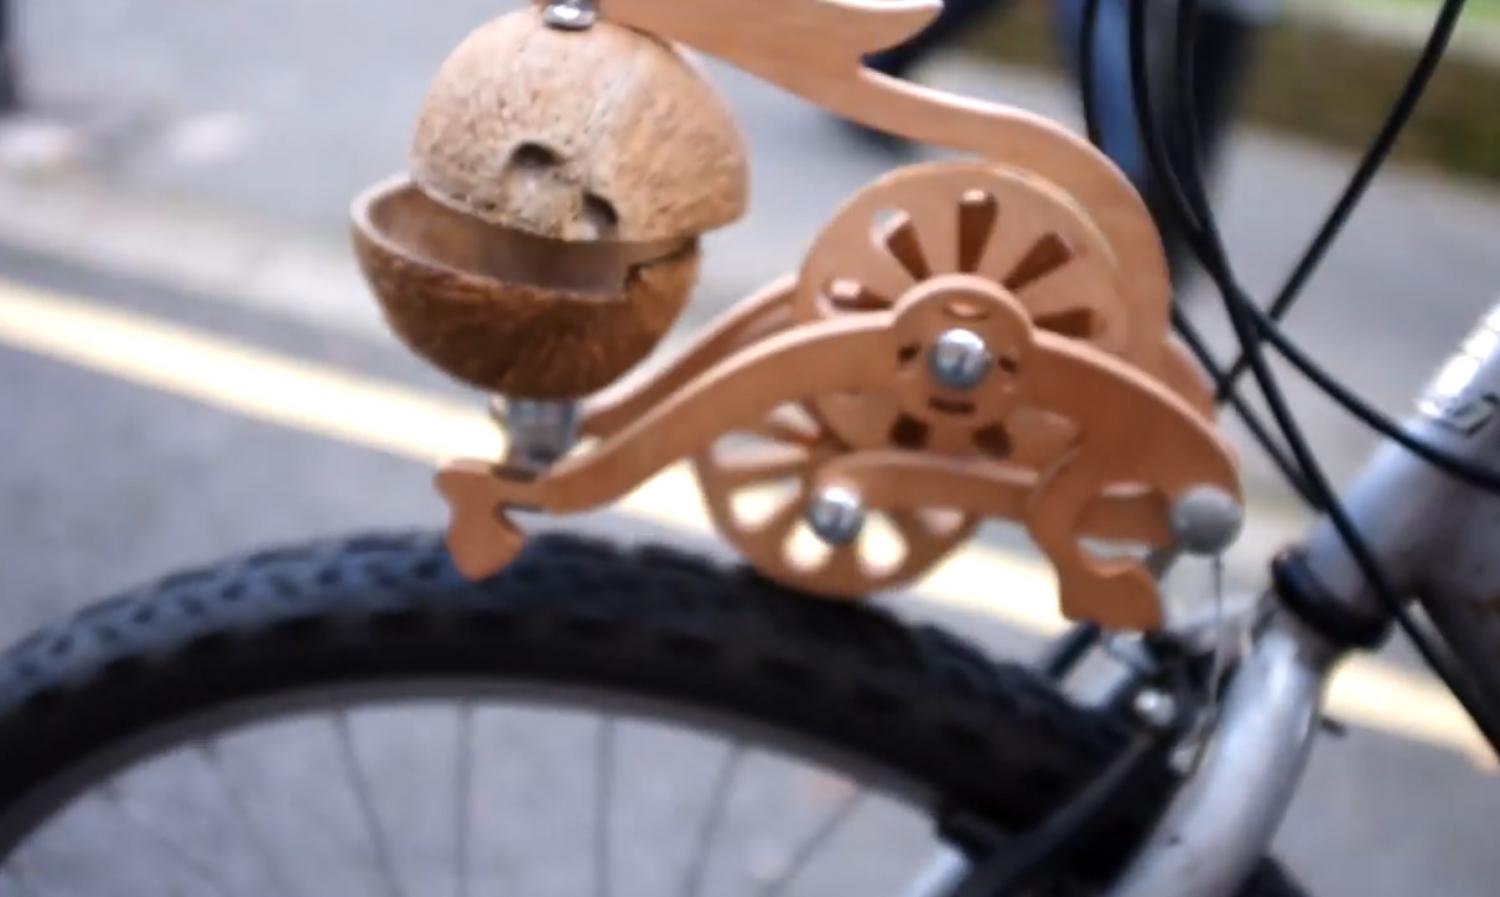 Trotify galloping horse bicycle accessory with coconuts - Monty Python bike gadget